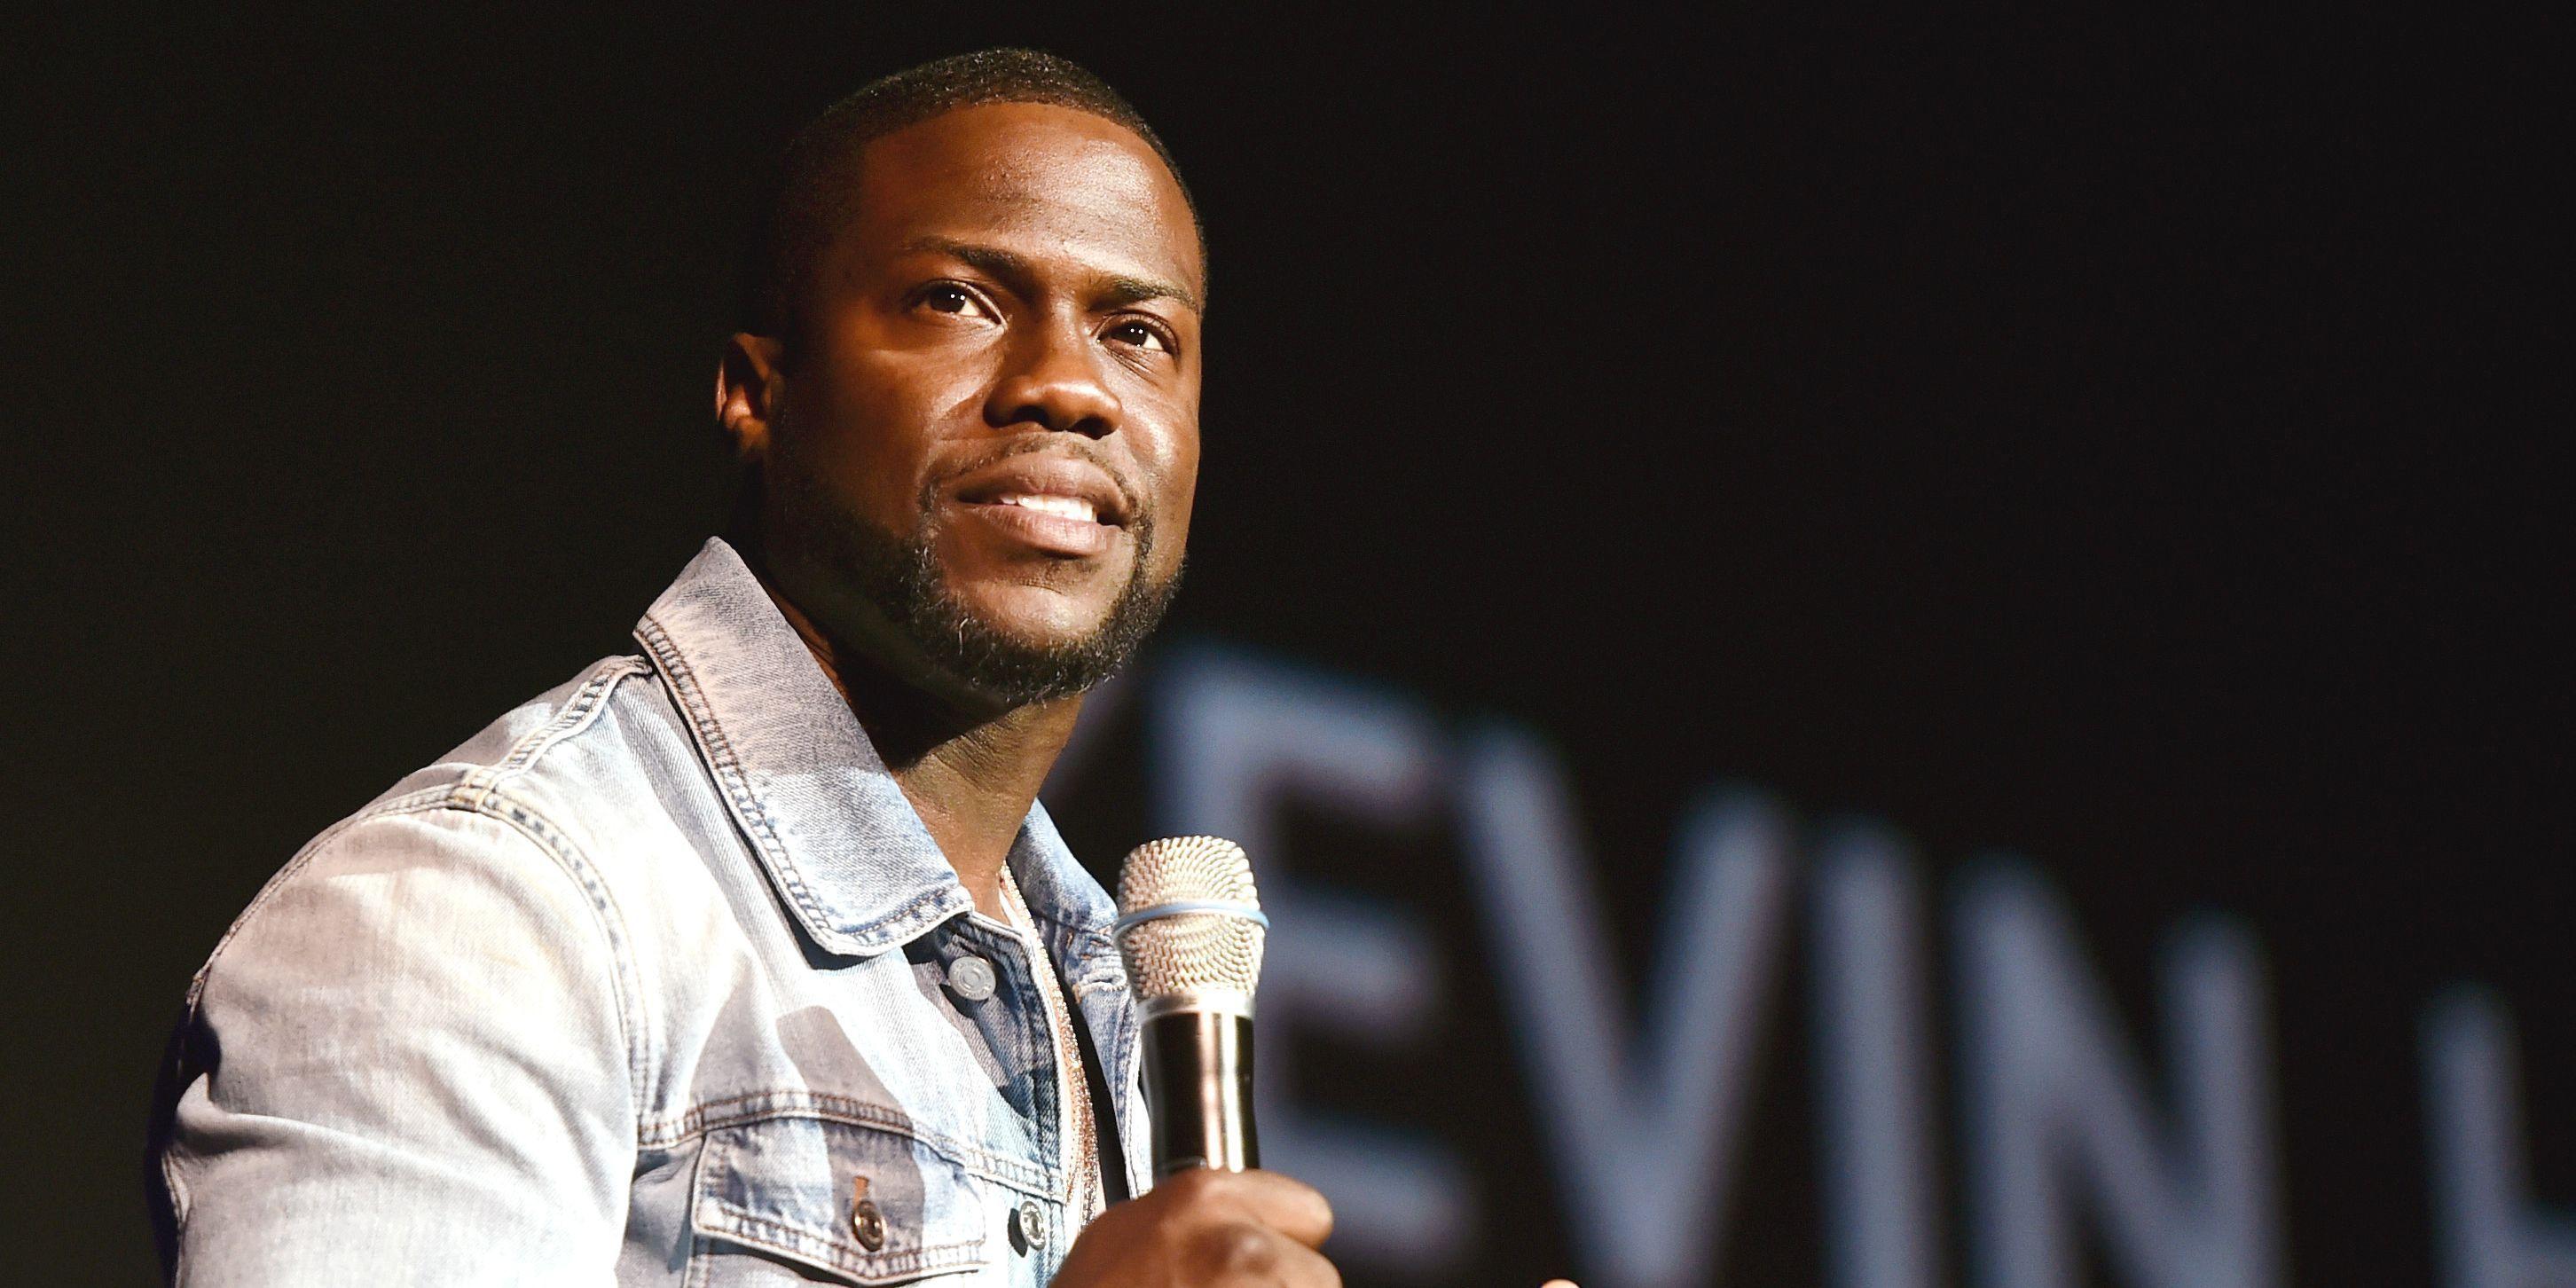 Kevin Hart Wallpaper Image Photo Picture Background